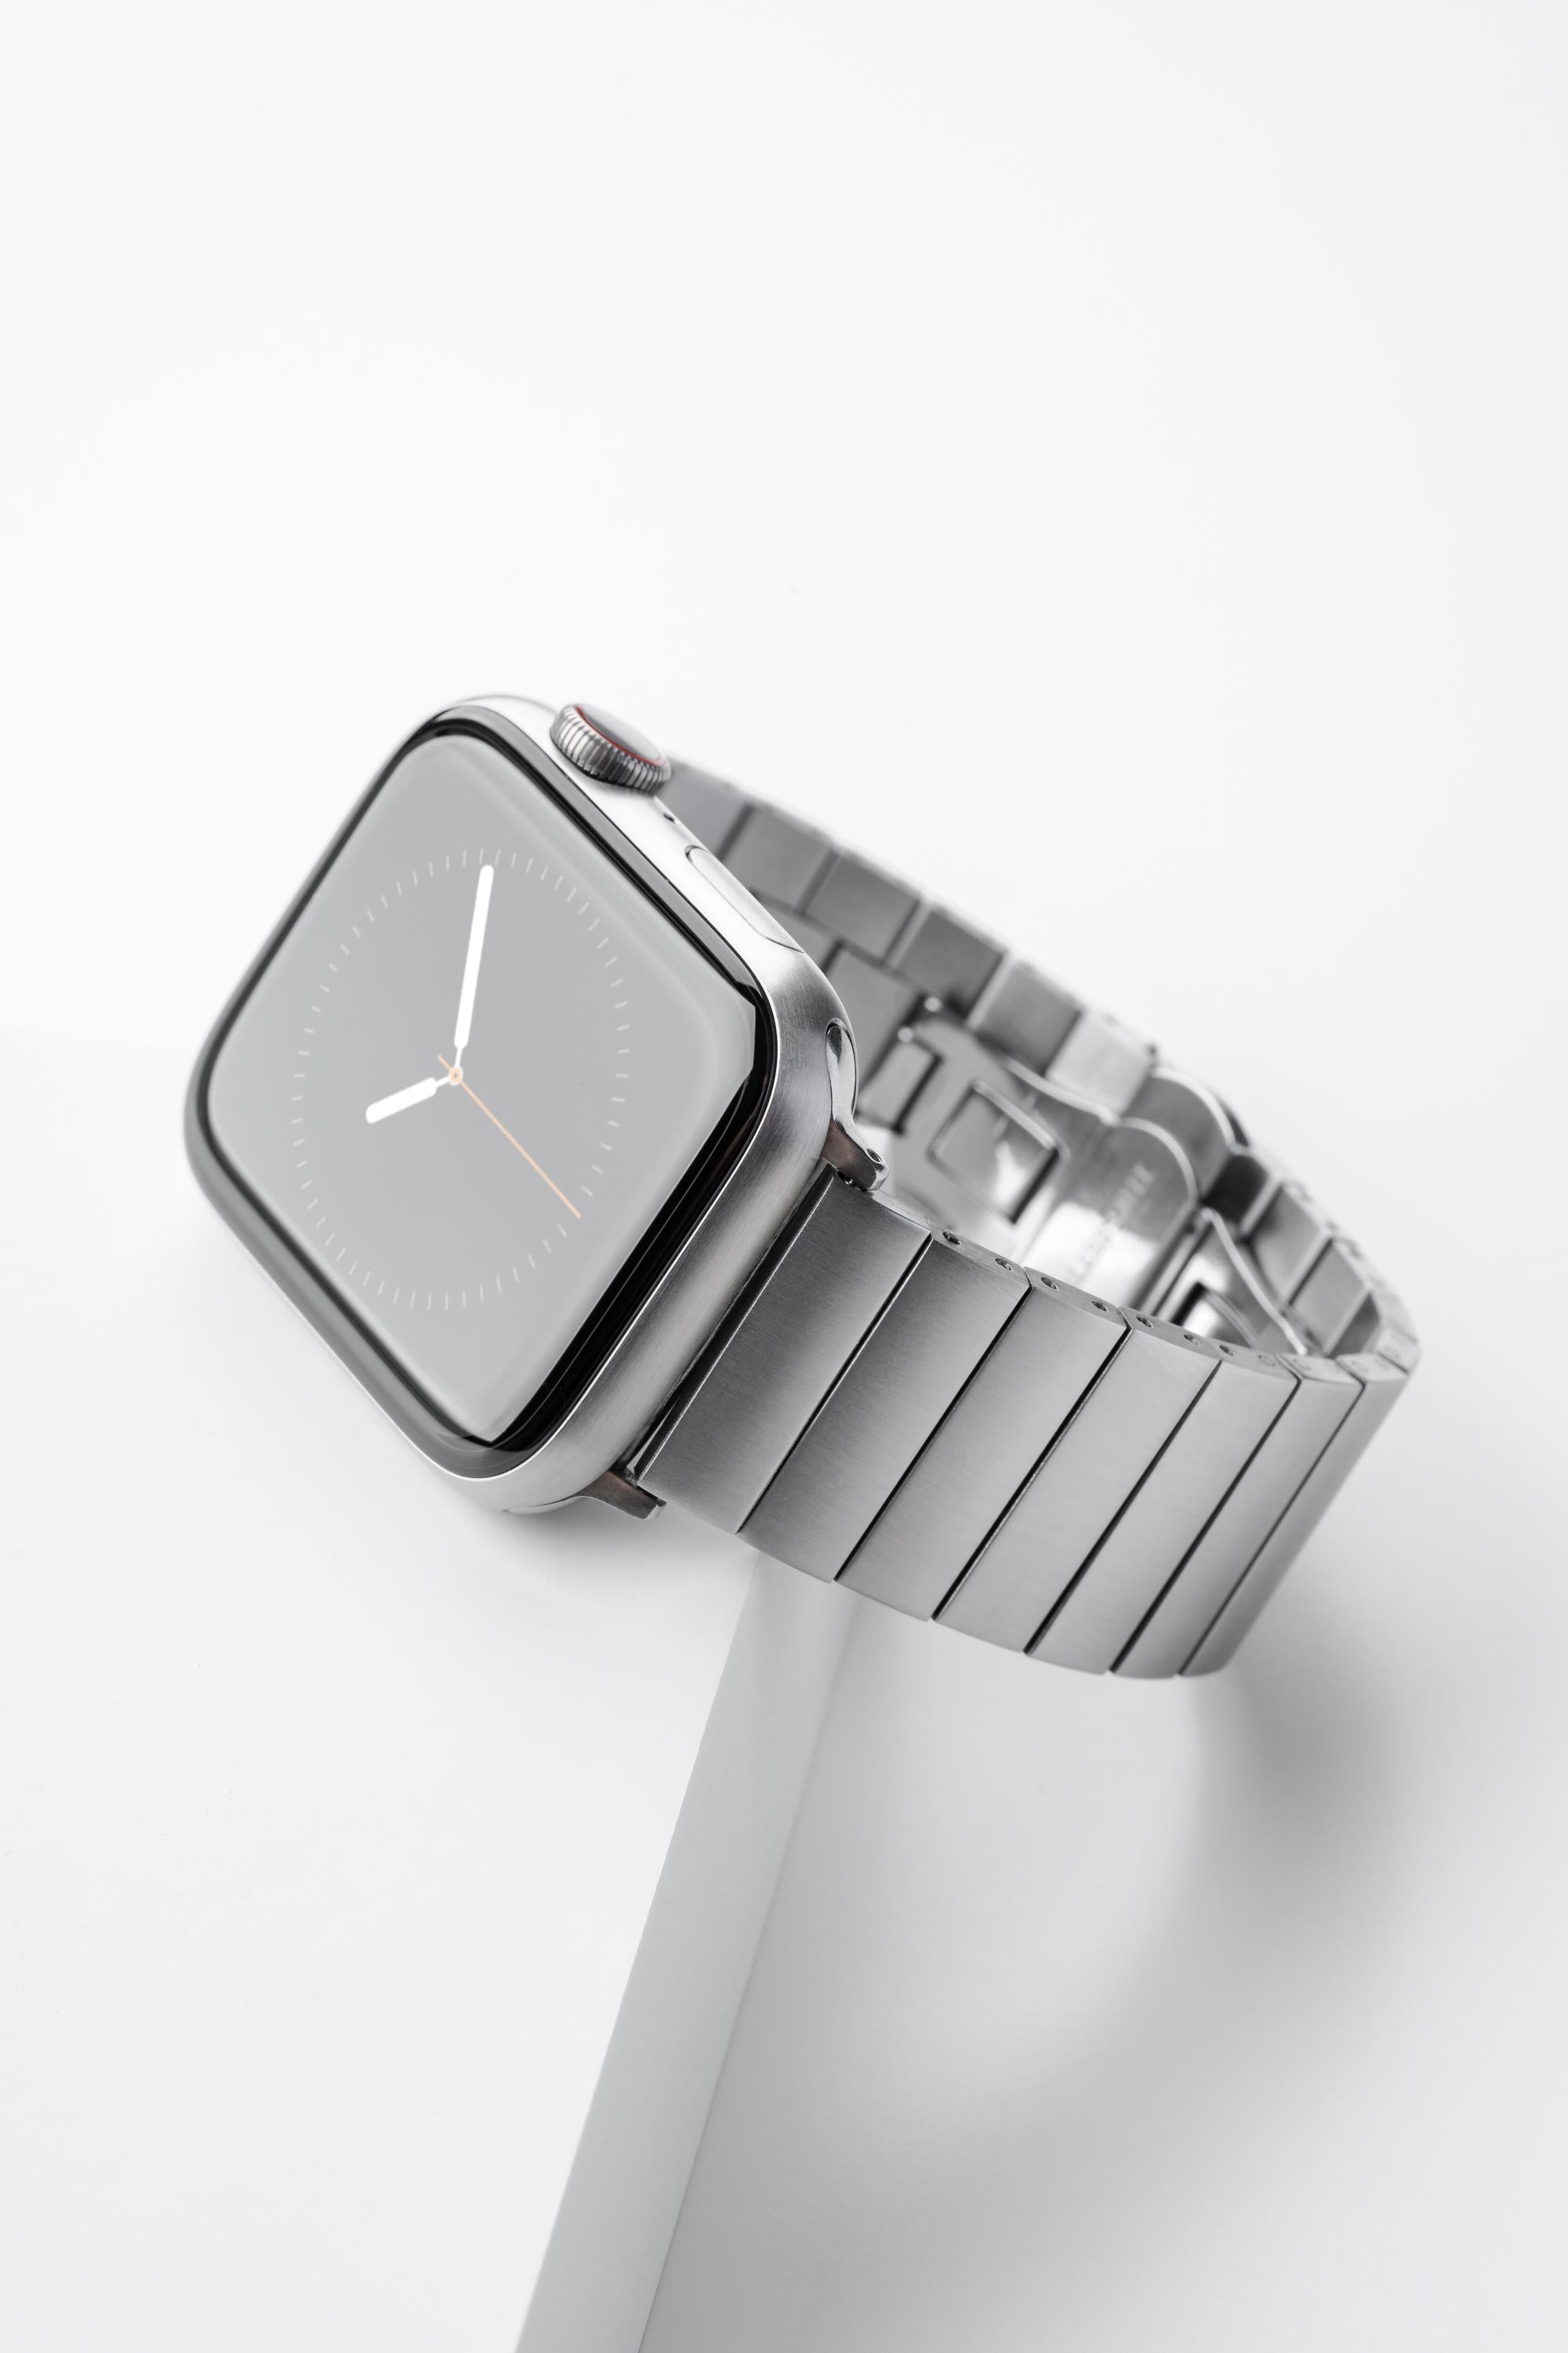 Metal Infinity Band for Apple Watch - Brushed Silver